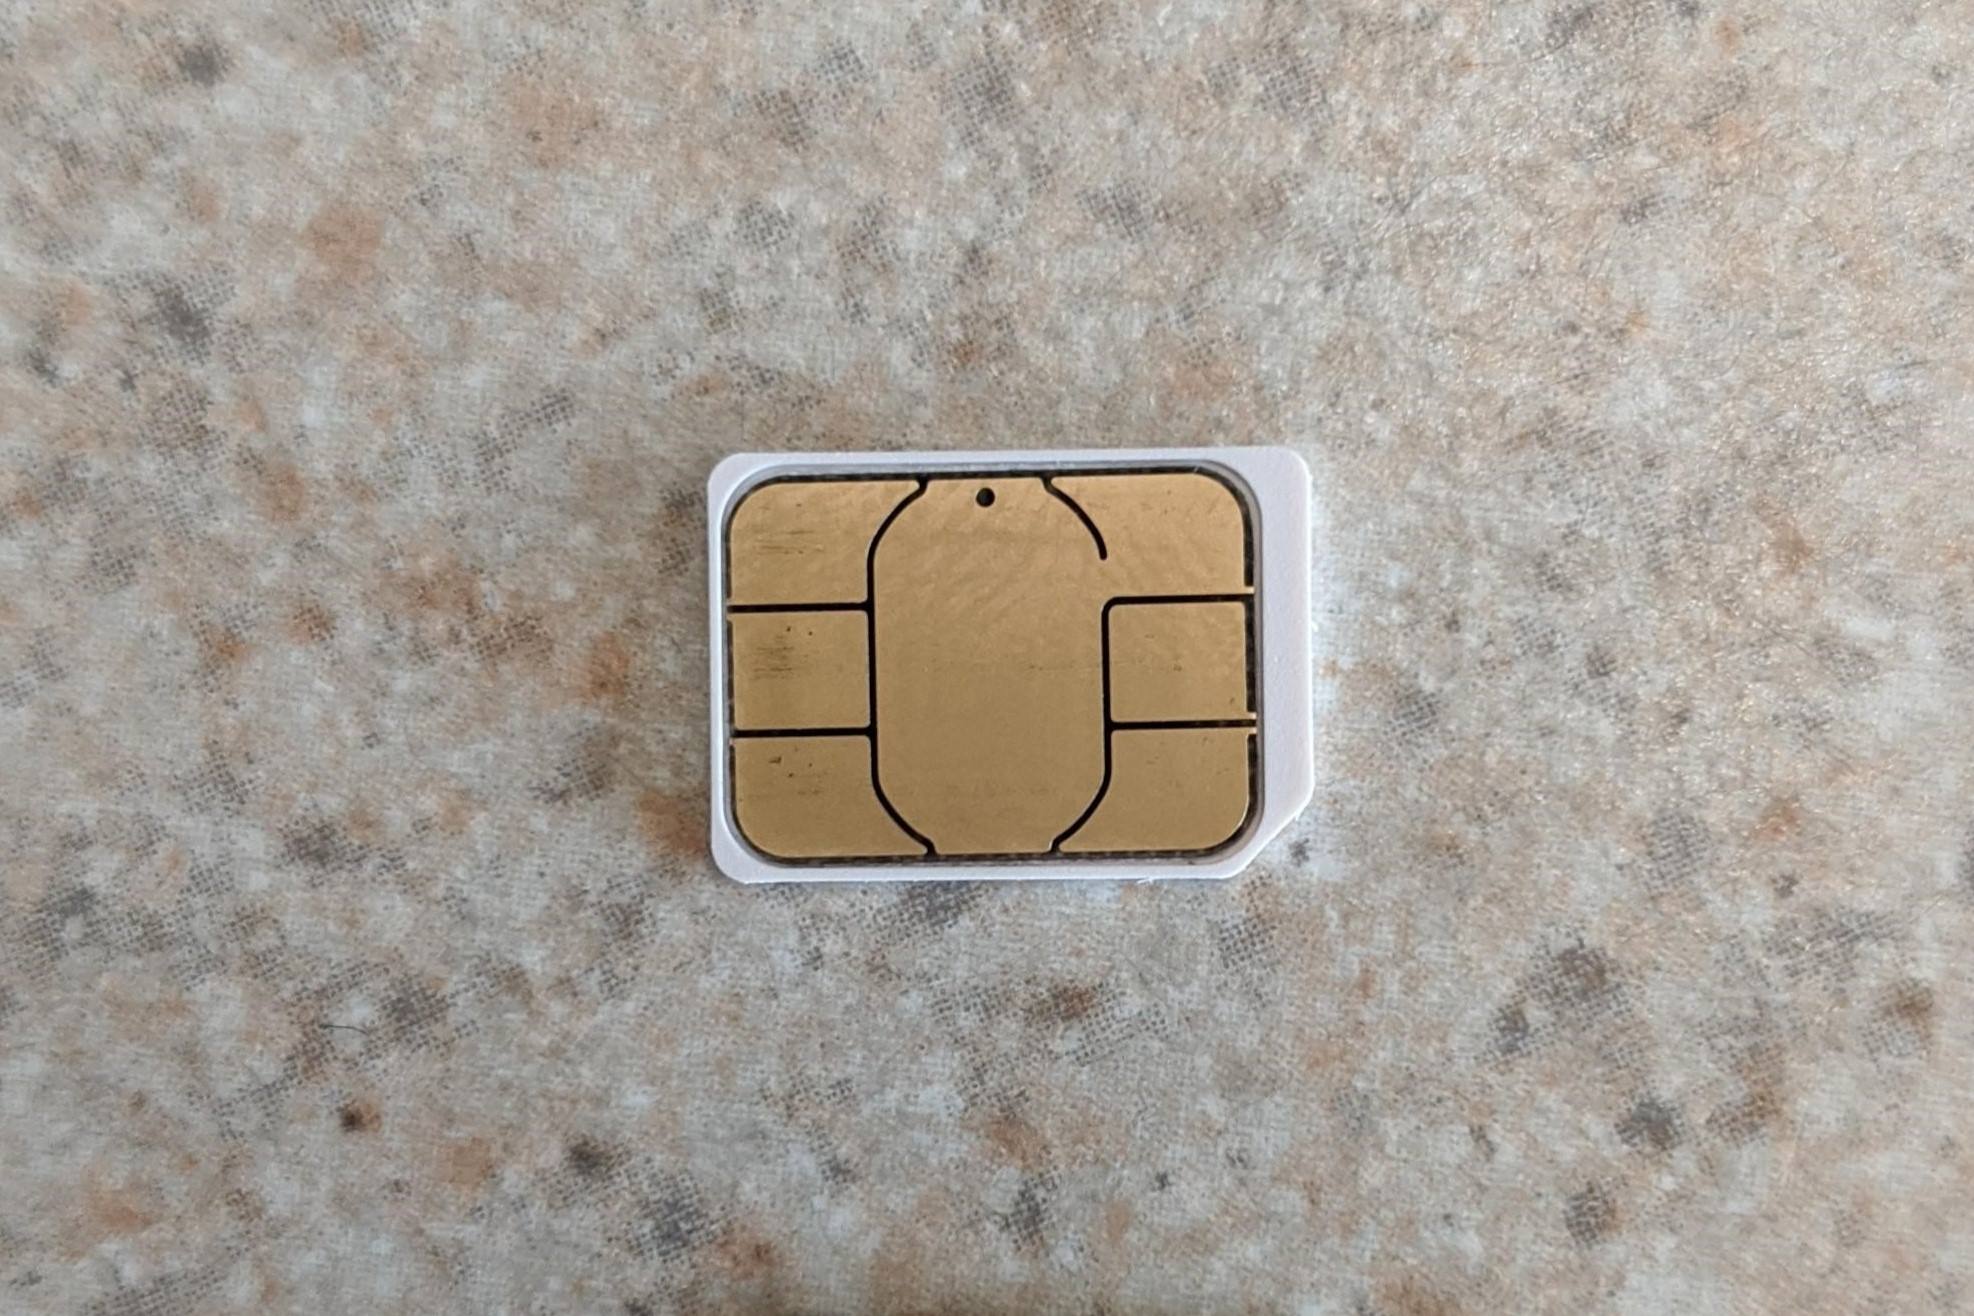 repairing-a-scratched-sim-card-tips-and-solutions